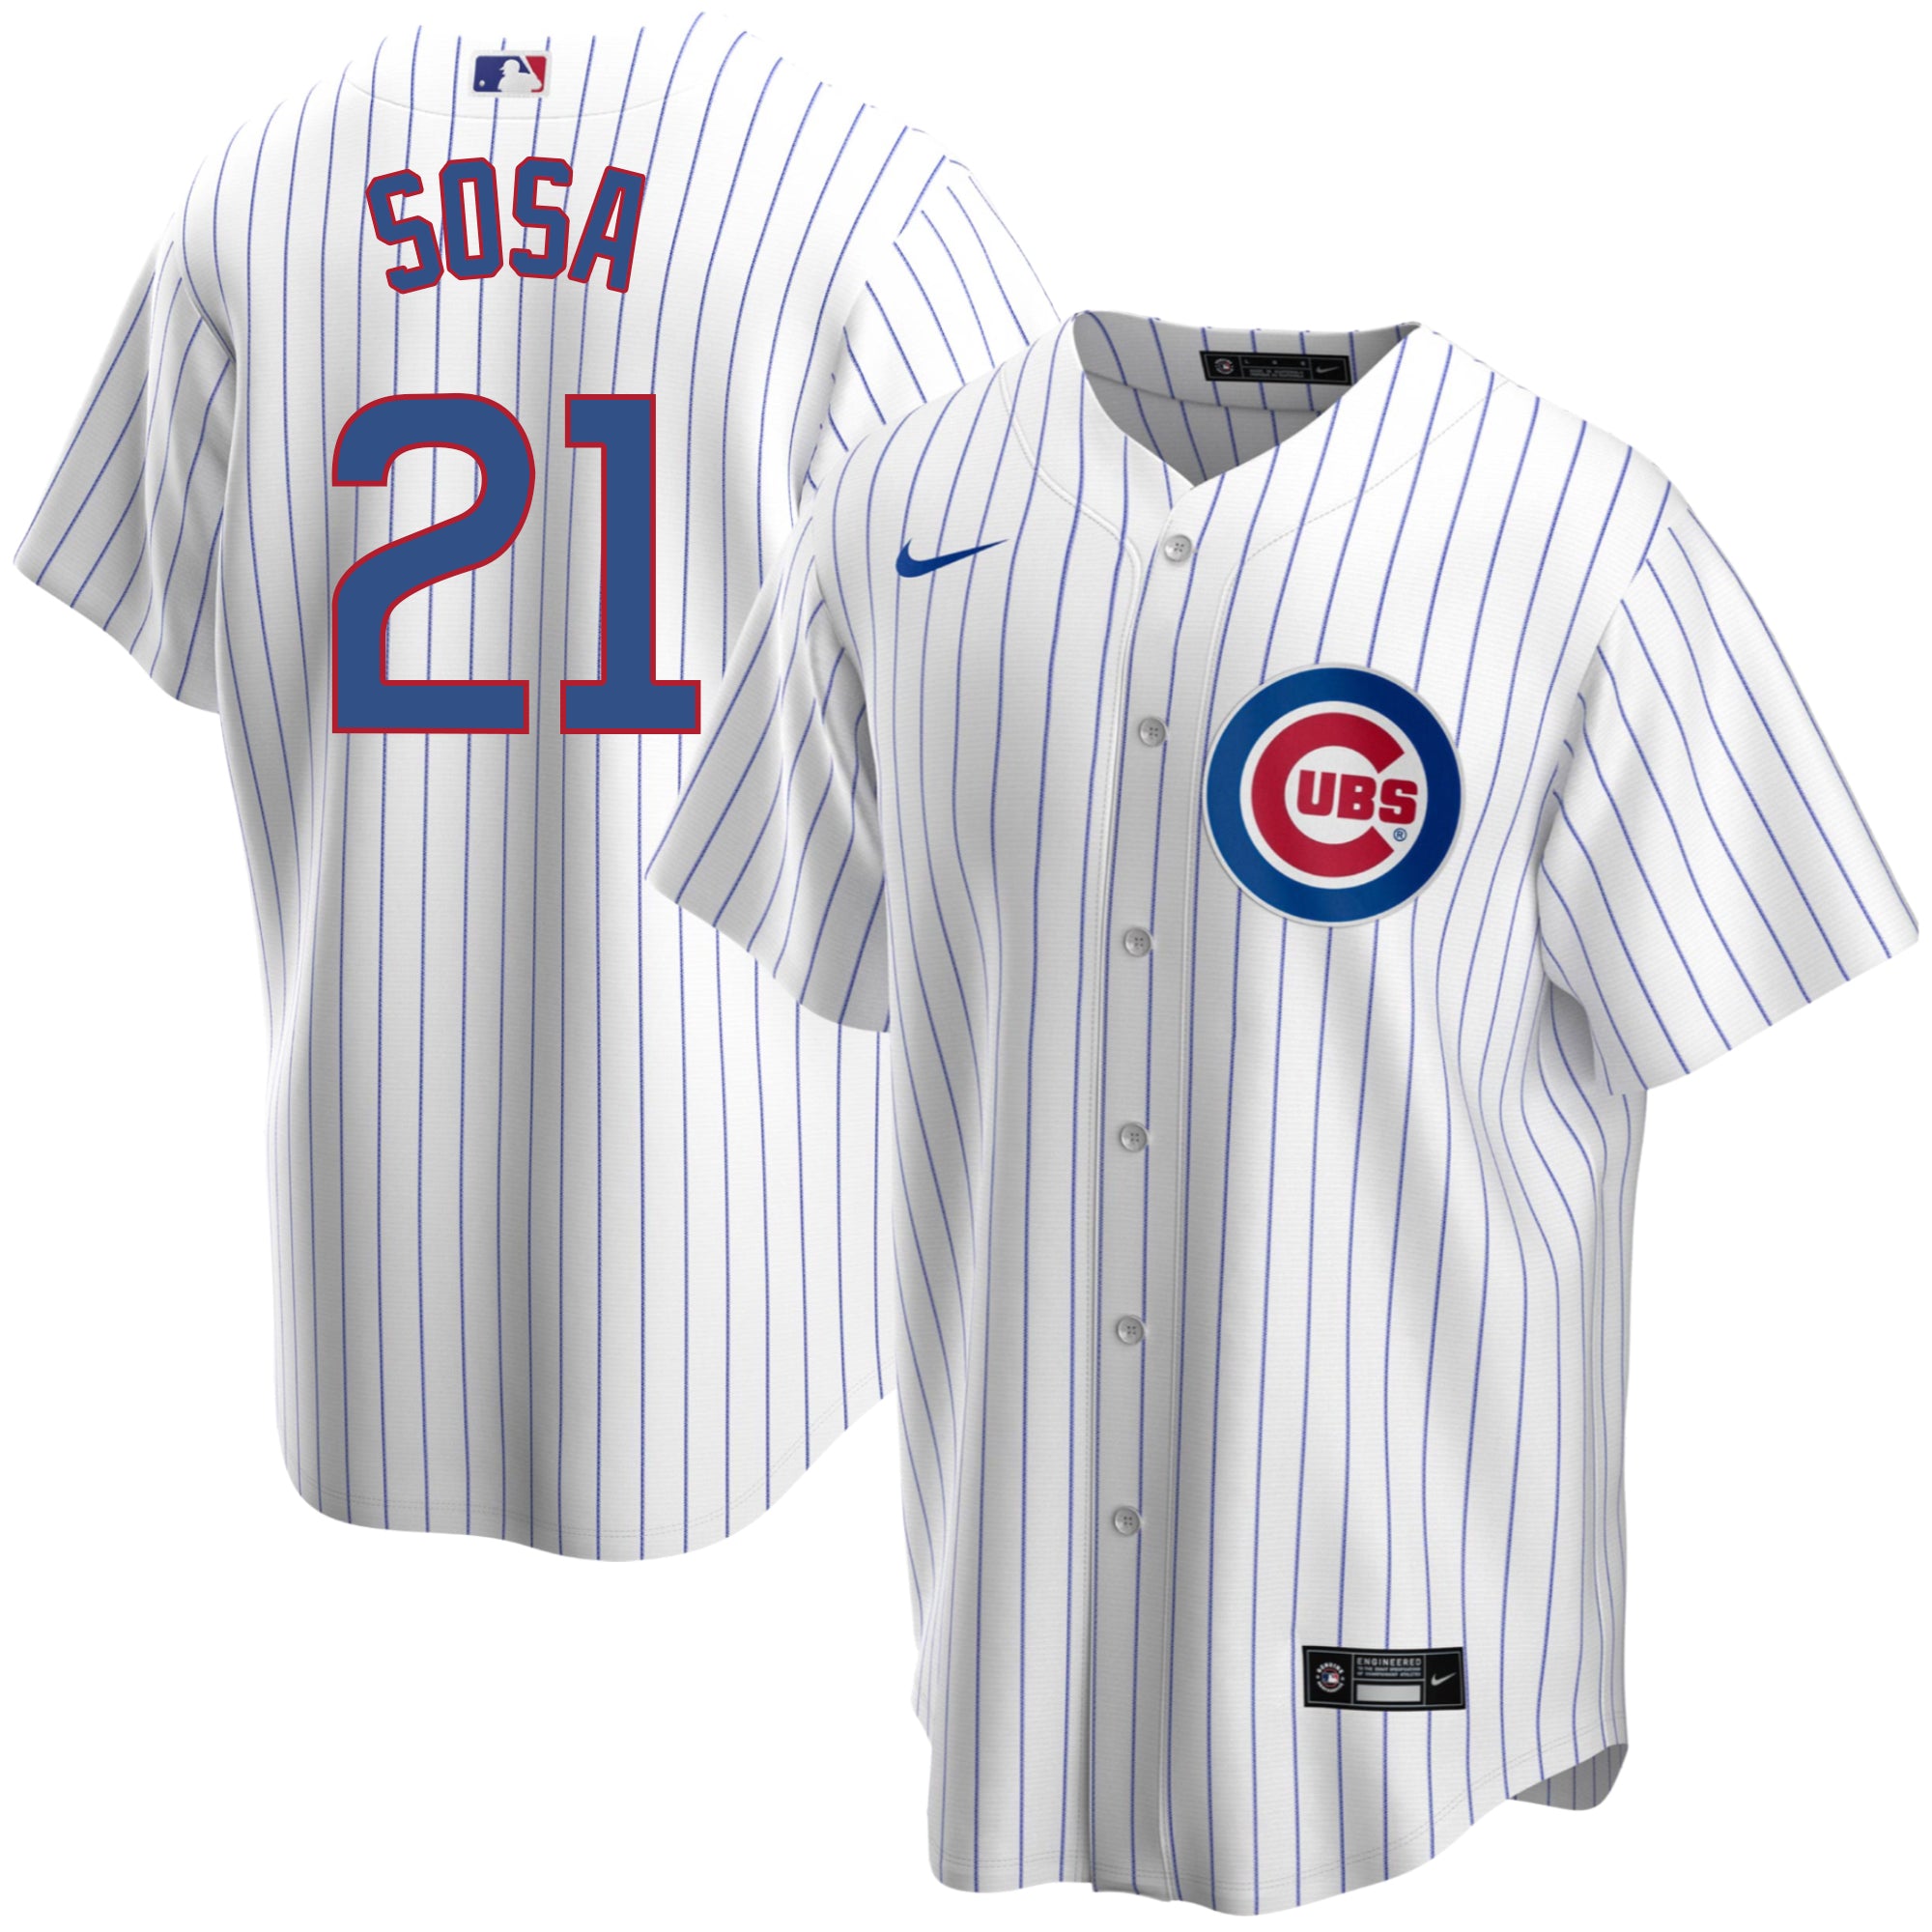 Chicago Cubs XXL Men's Majestic Jersey-Sammy Sosa- Cooperstown Collection